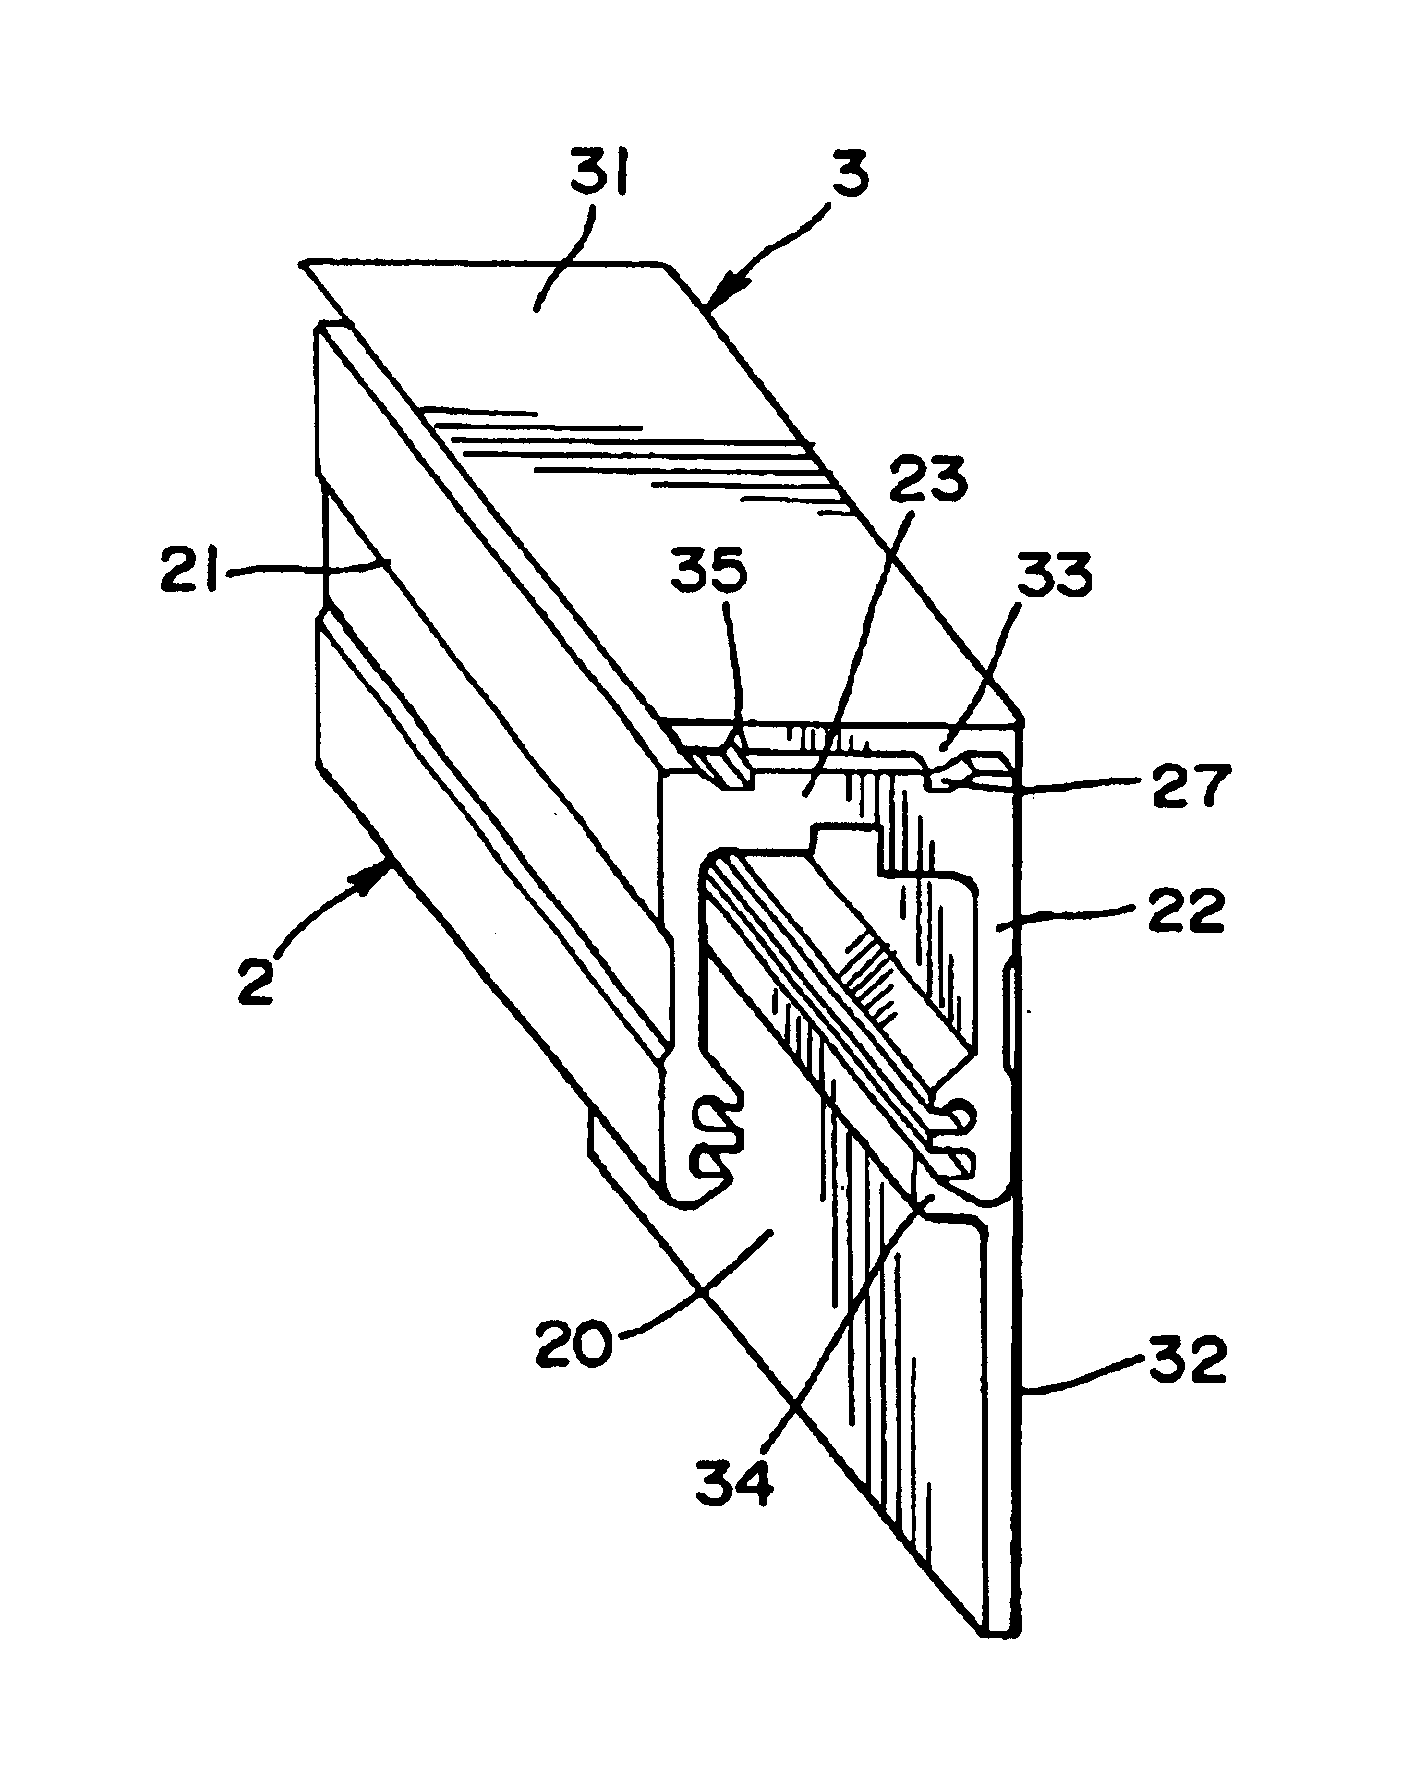 Cover for a sealed linear encoder and a sealed linear encoder